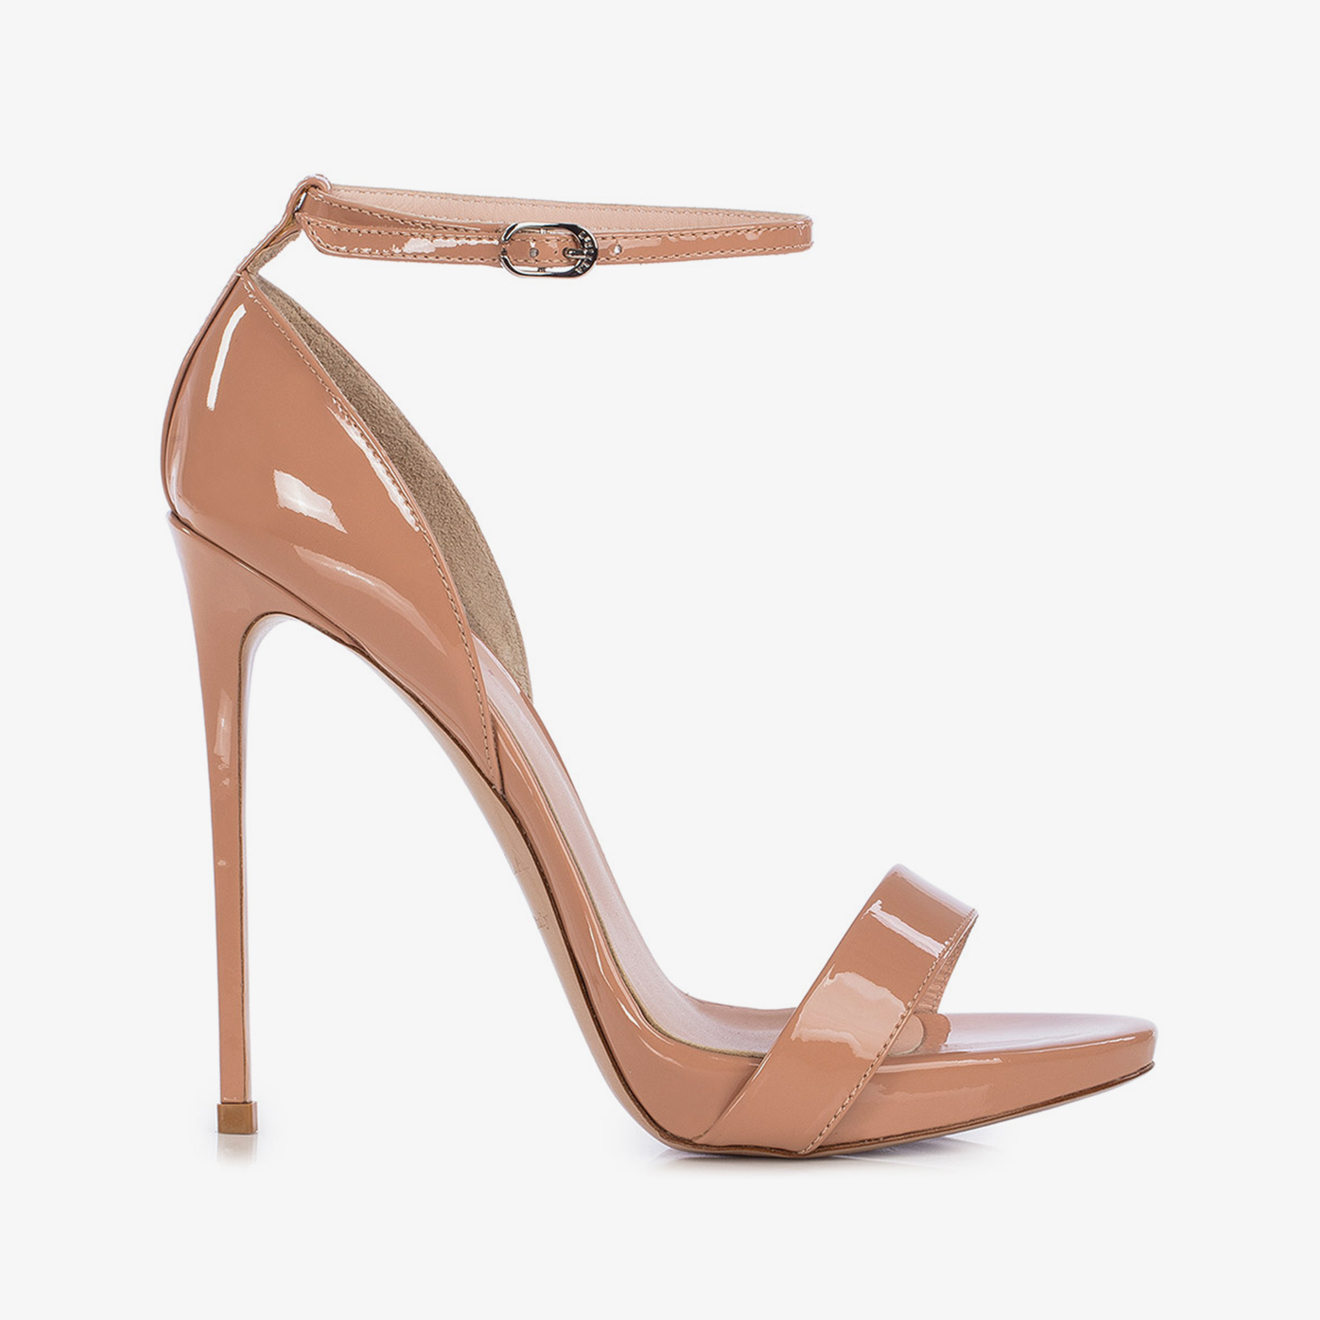 NAIKE SANDAL 120 mm - Le Silla official outlet